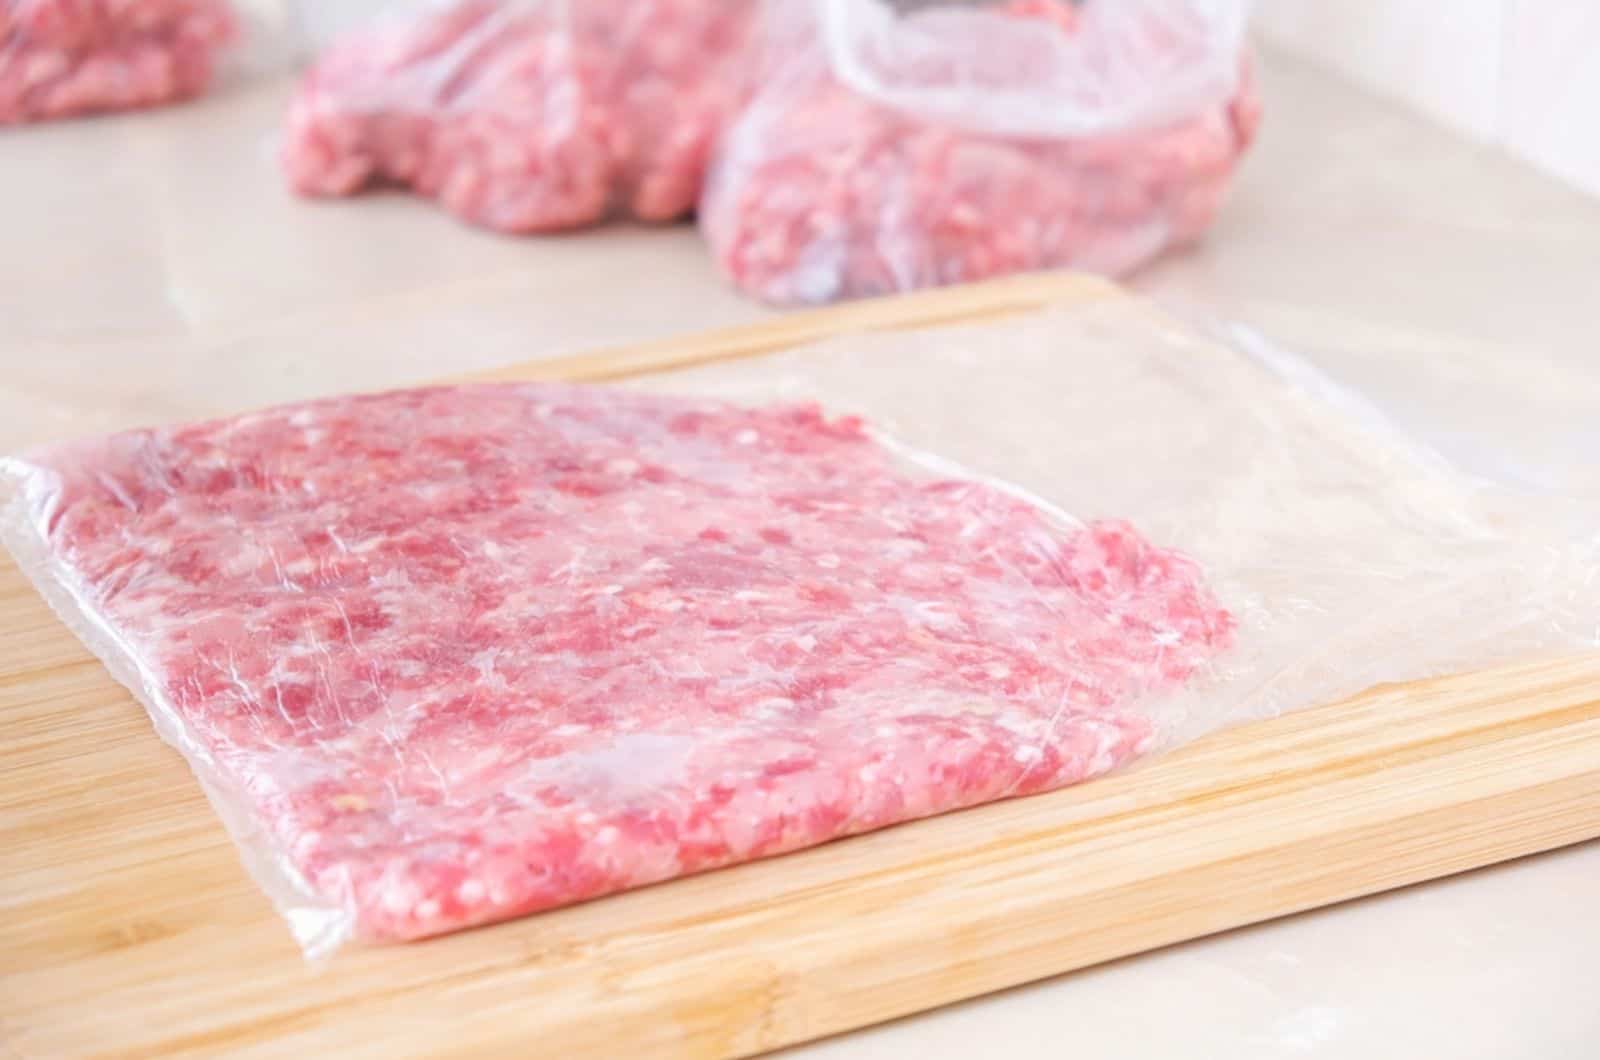 A man makes flat minced pork and beef in bags for storage in the freezer